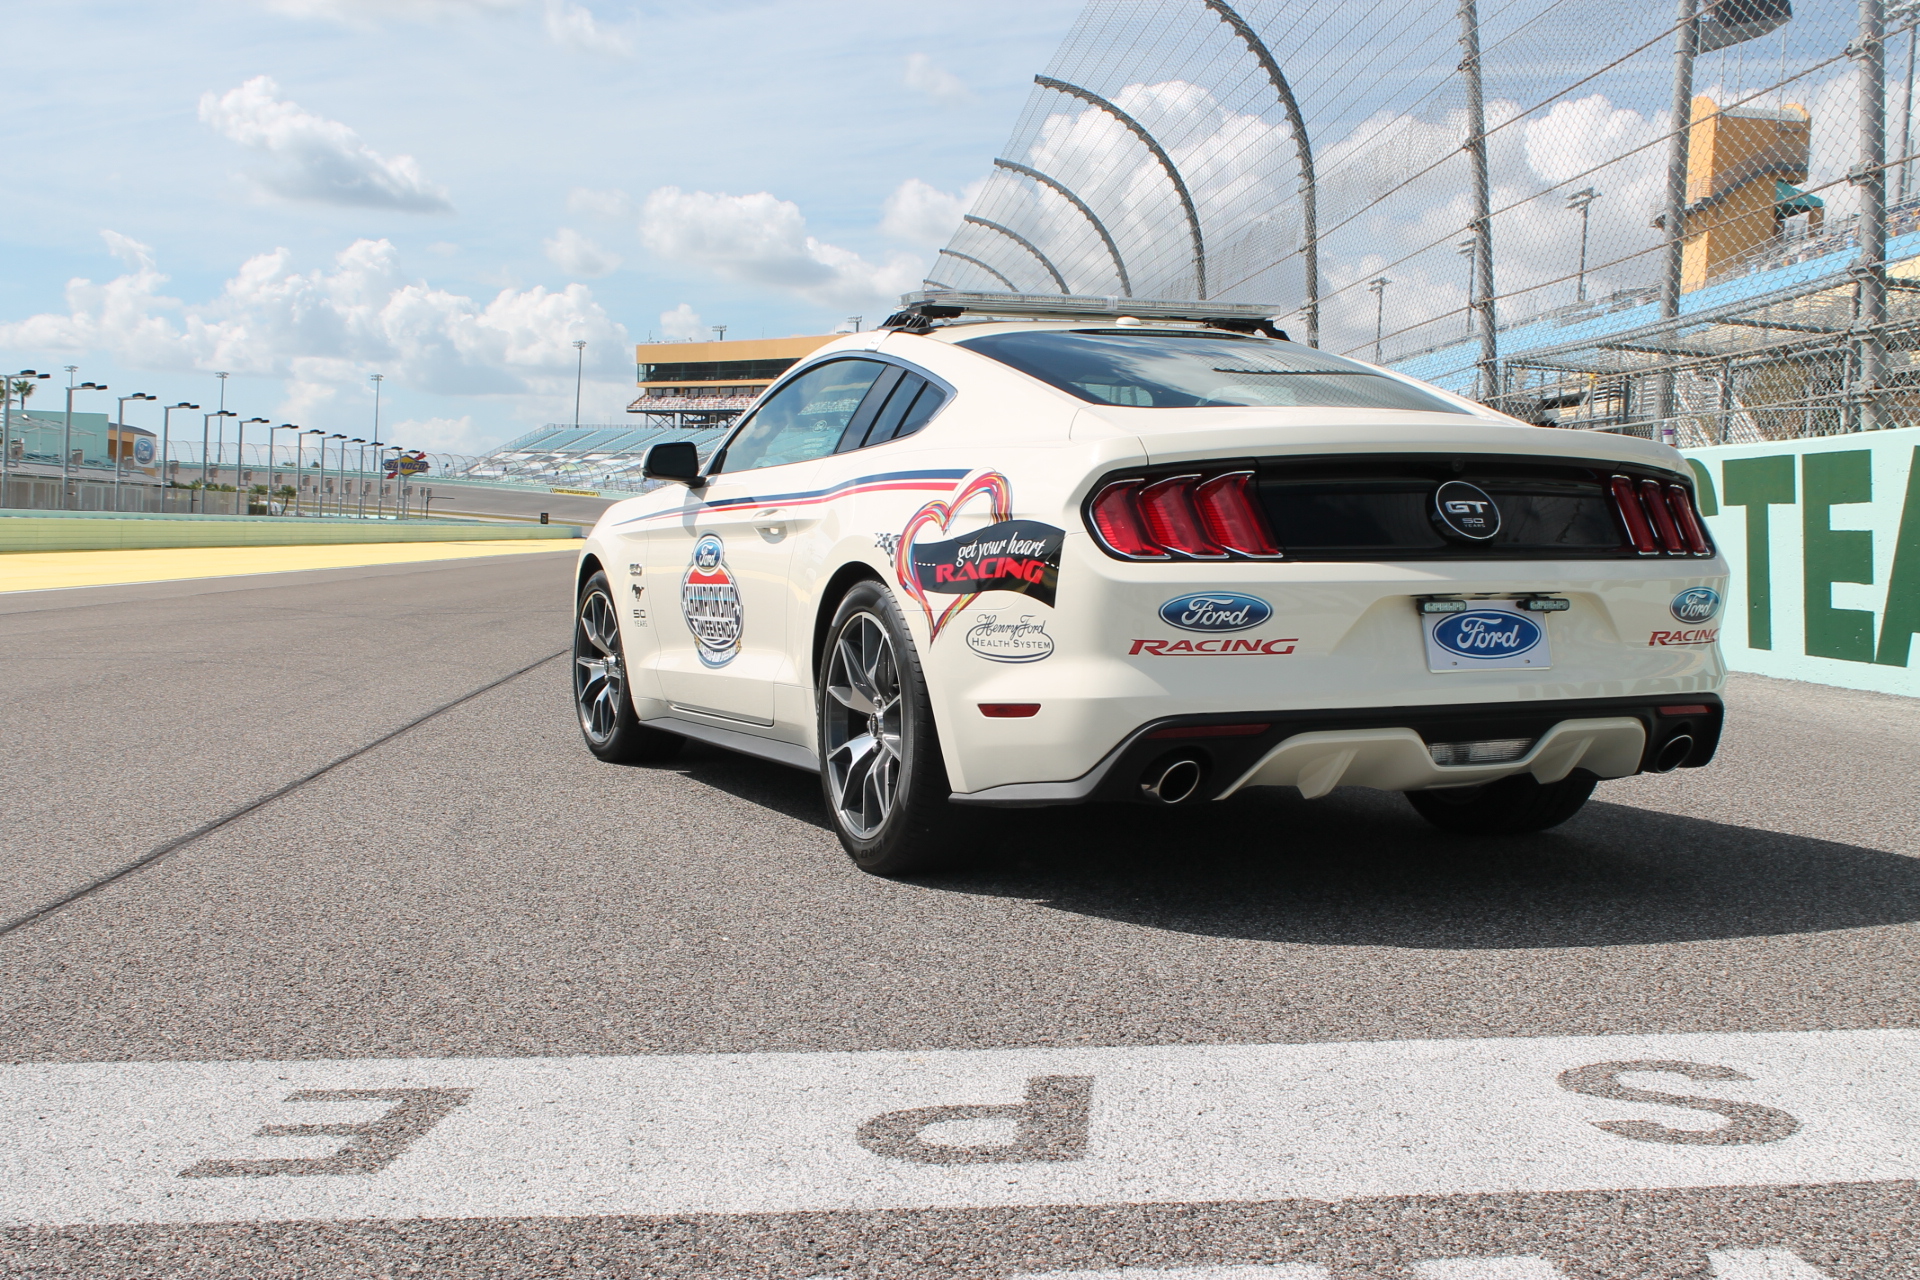 2015 Mustang Pace Car for Ford Championship Weekend